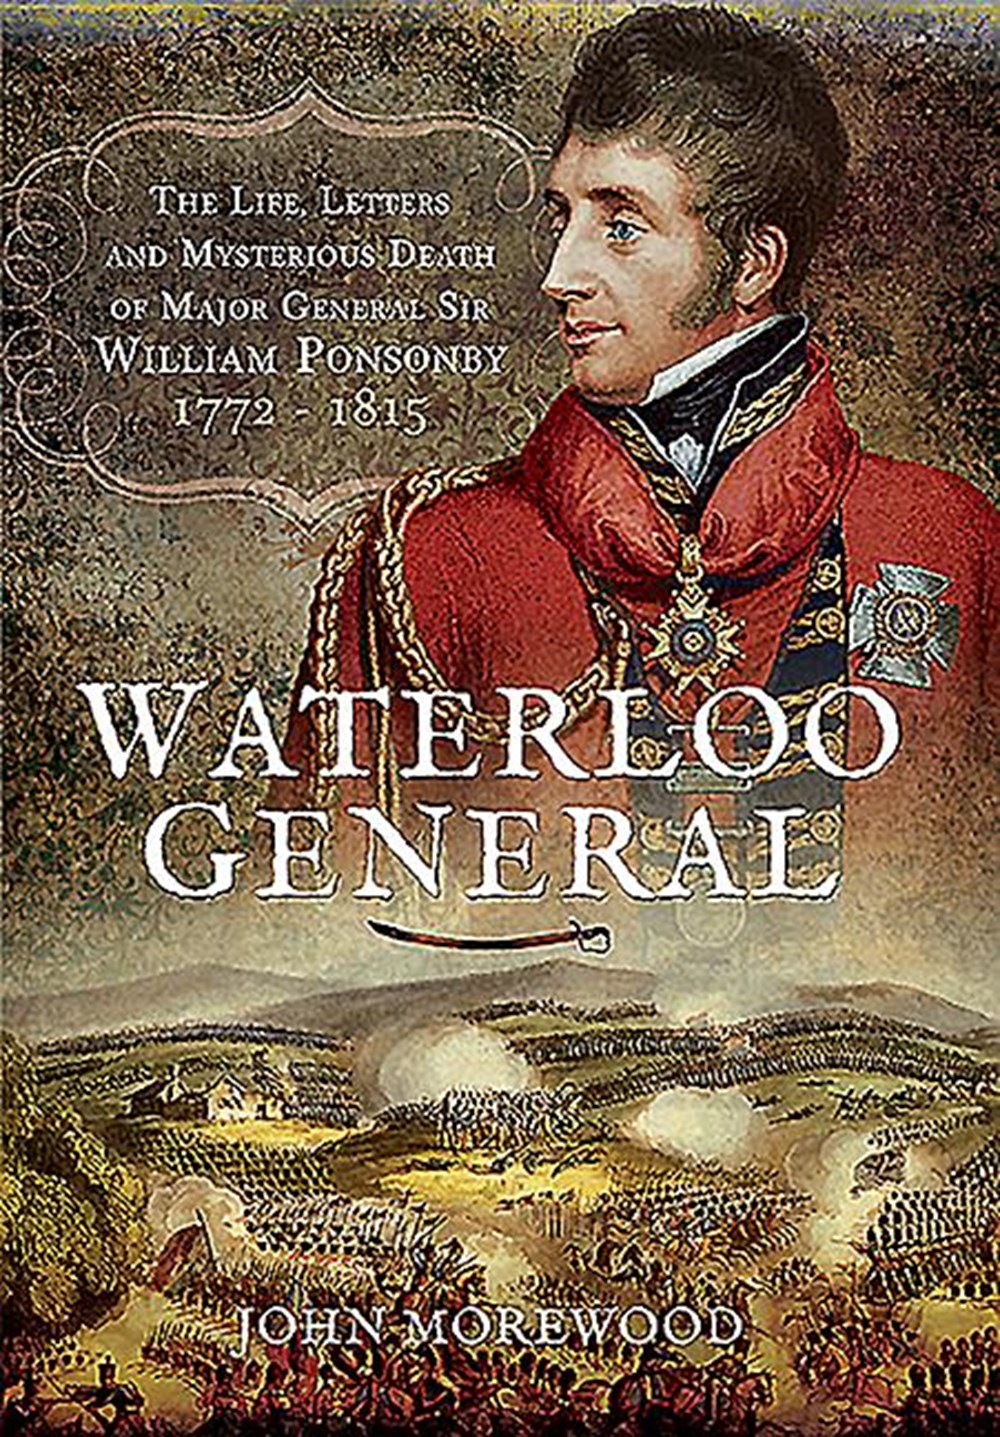 Waterloo General: The Life, Letters and Mysterious Death of Major General Sir William Ponsonby 1772 